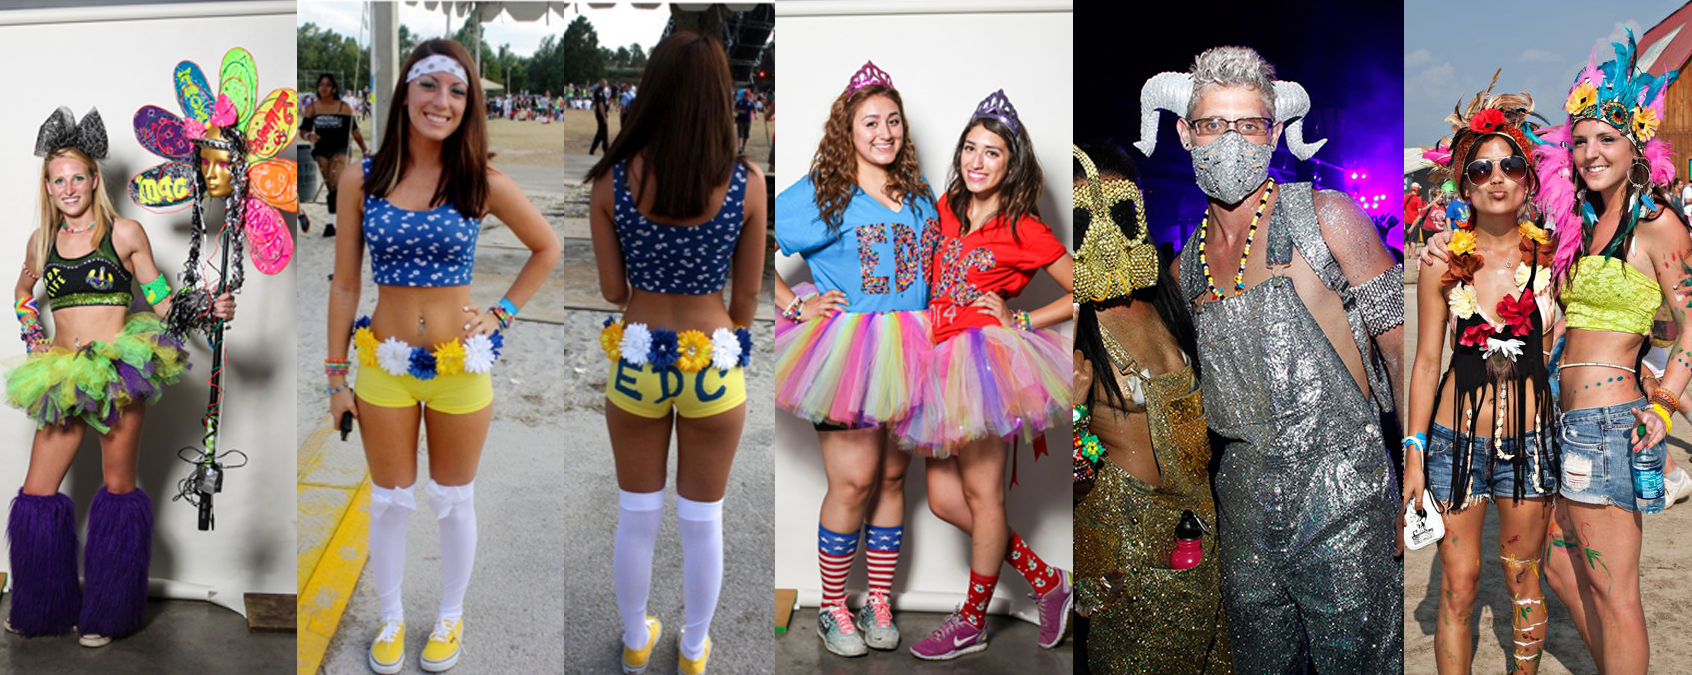 EDC ProTip: What to Wear to EDC | The Scene is Dead